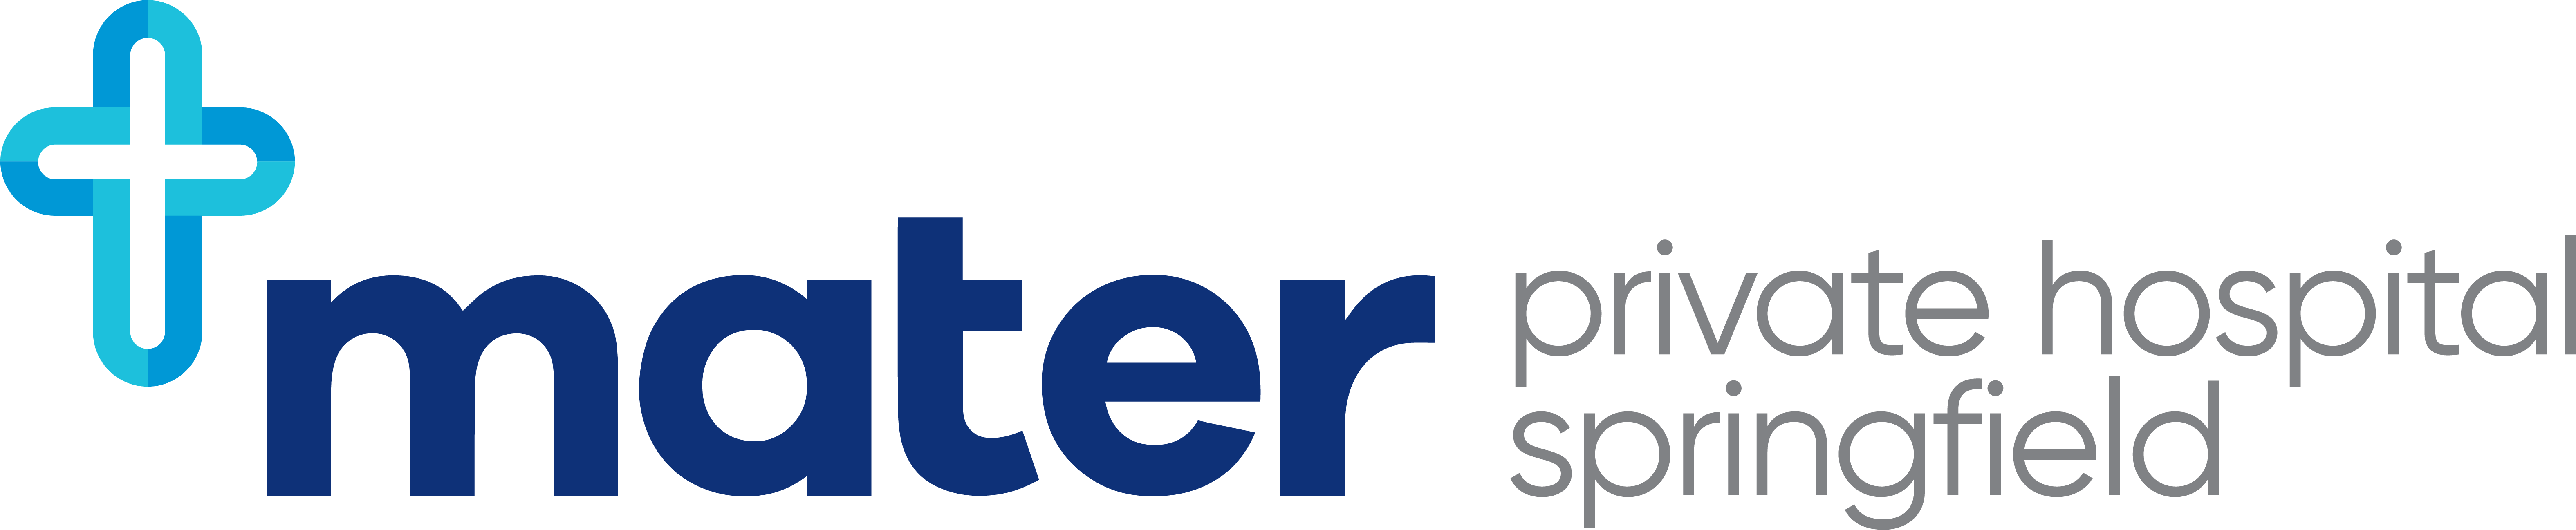 Mater Private Hospital Springfield Logo